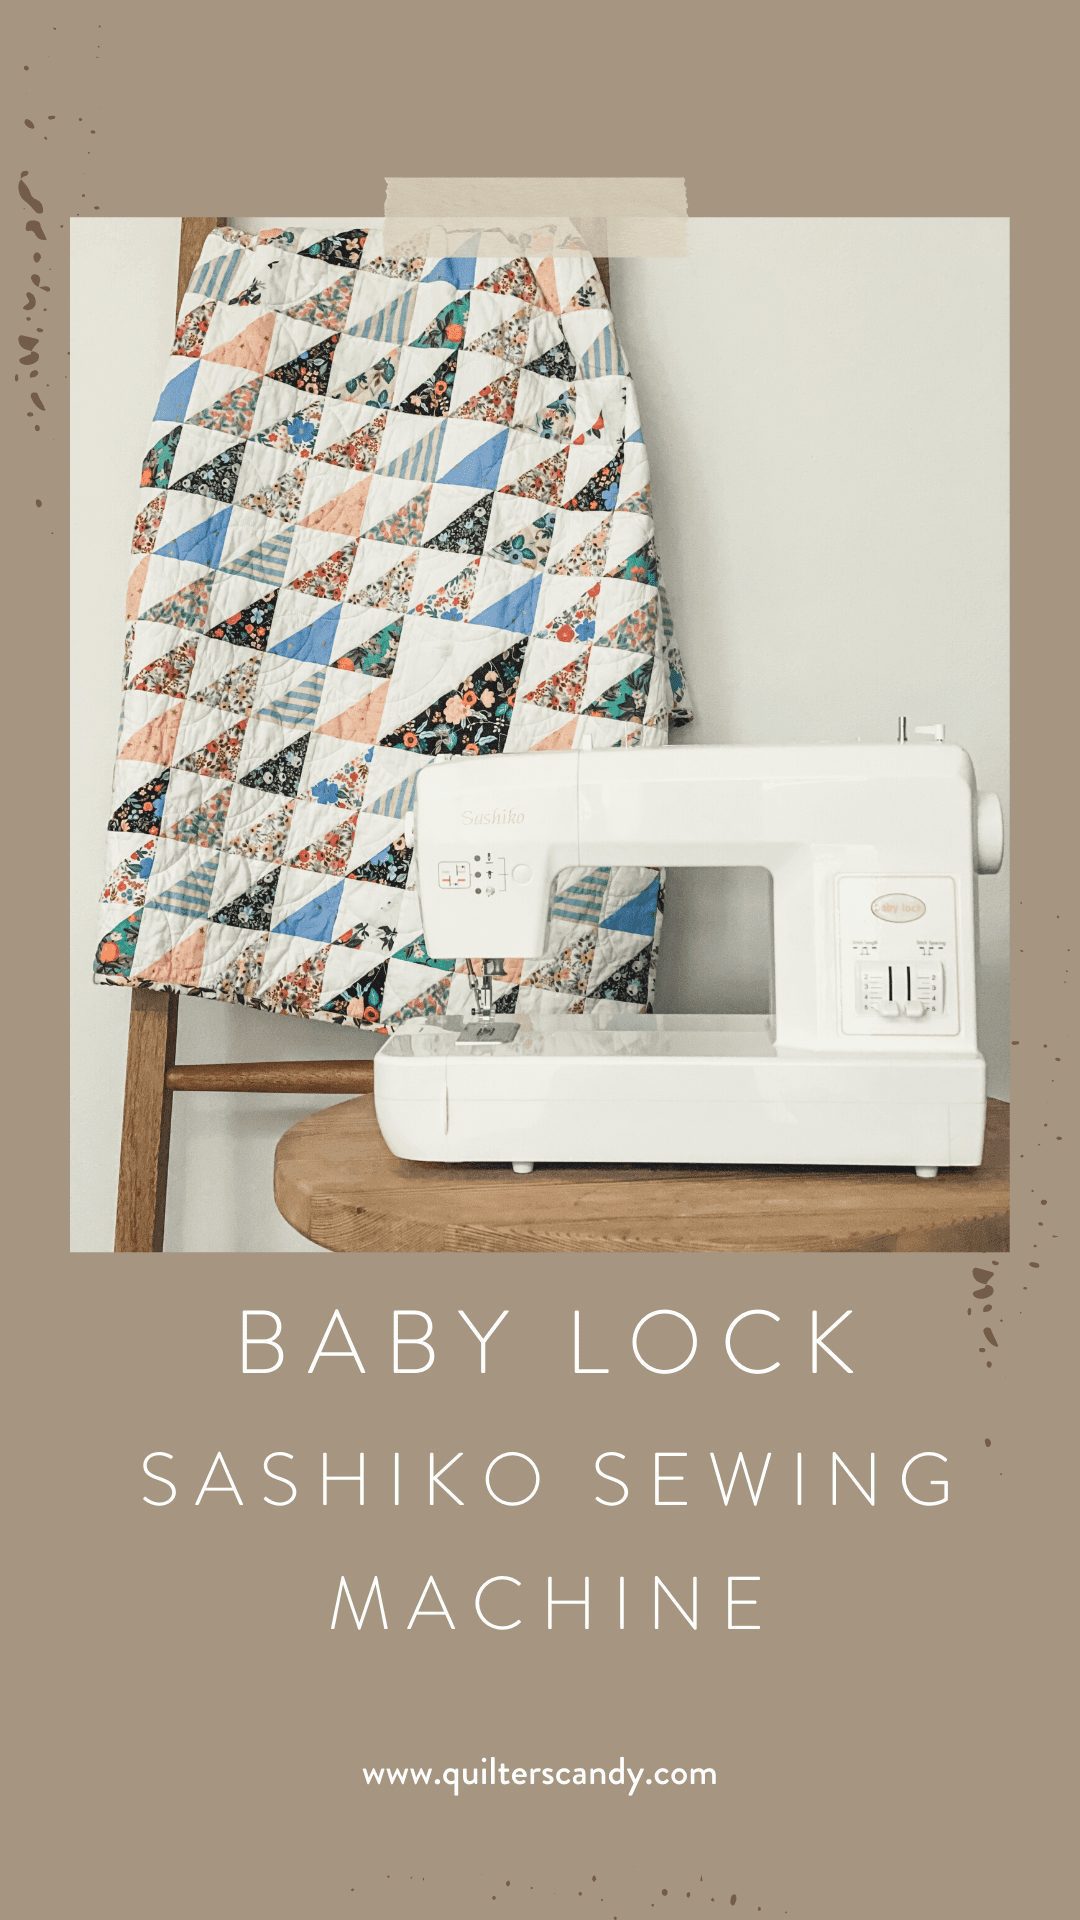 Quilters Candy shares the Baby Lock Sashiko Sewing Machine